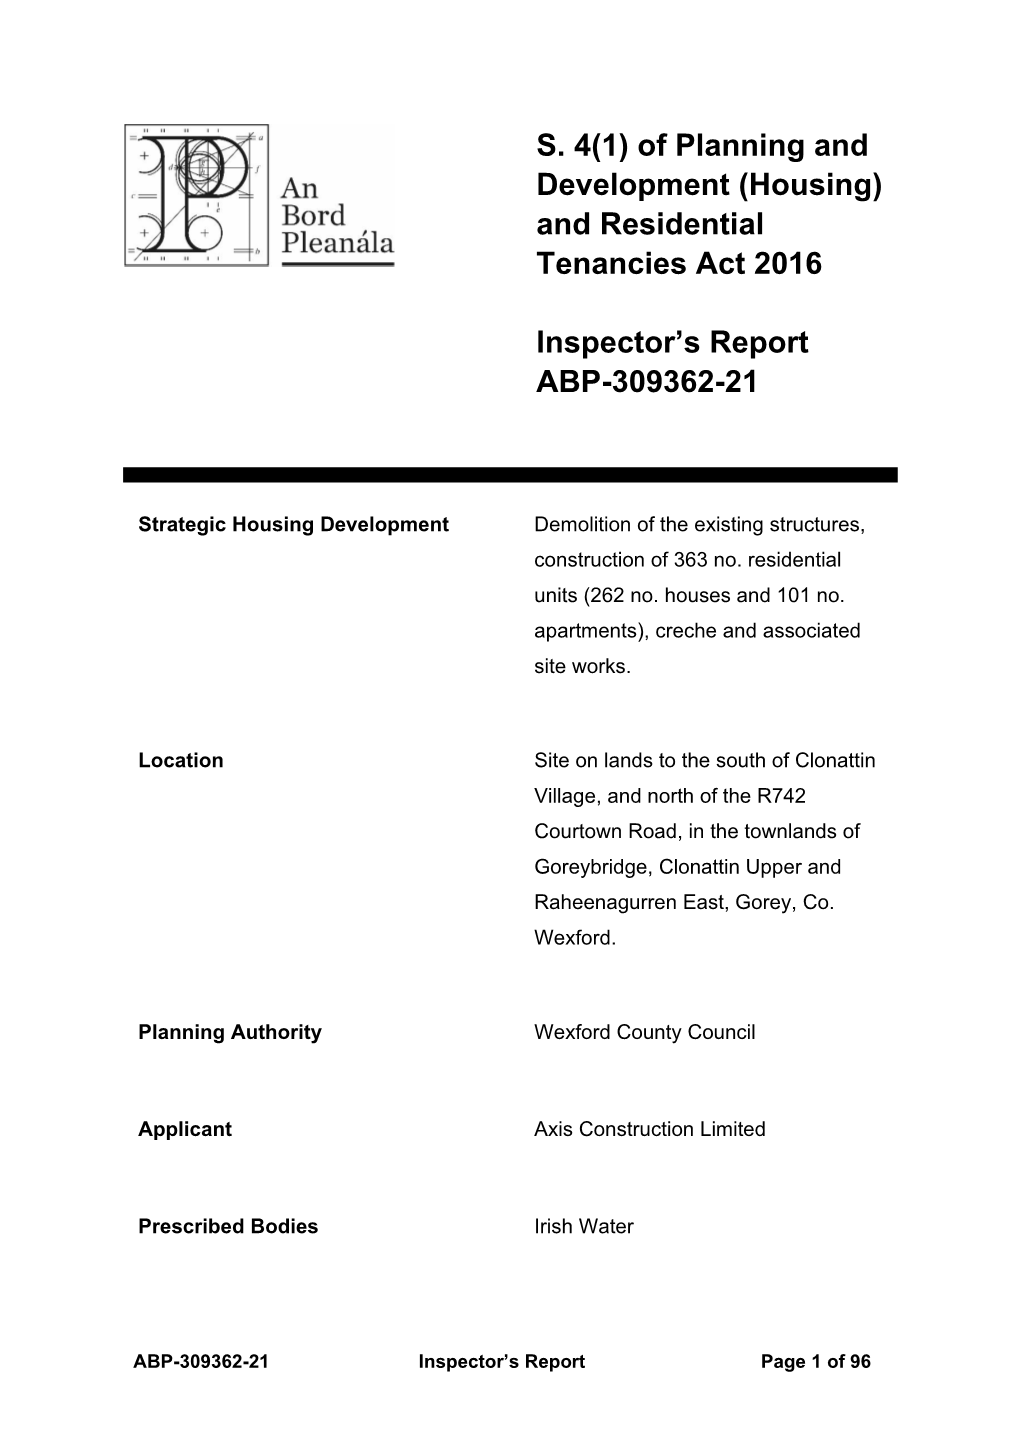 Of Planning and Development (Housing) and Residential Tenancies Act 2016